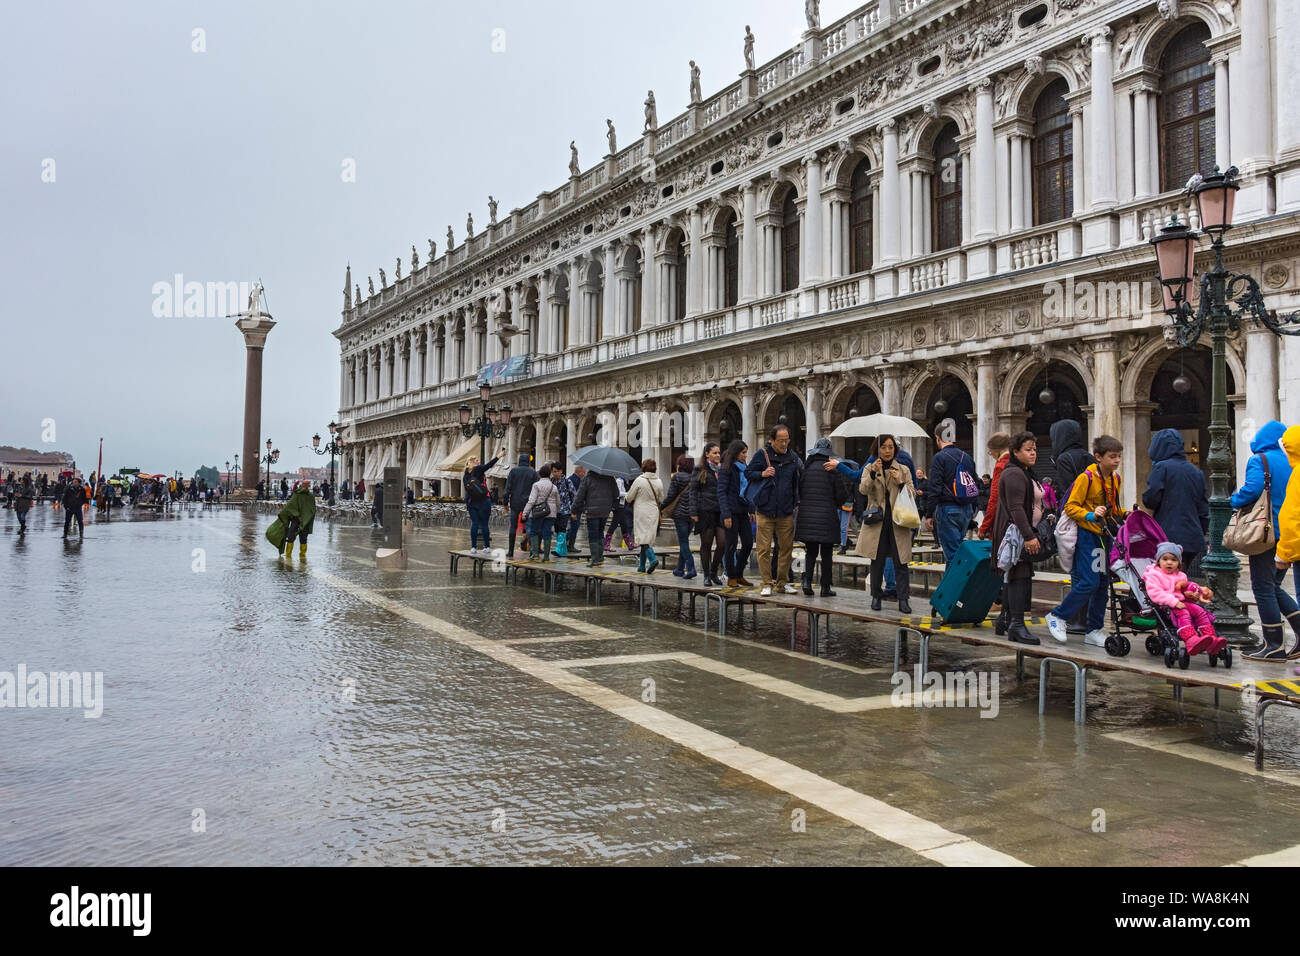 People walking on elevated platforms during an Acqua alta (high water) event at the Biblioteca building, Piazzetta di San Marco, Venice, Italy Stock Photo